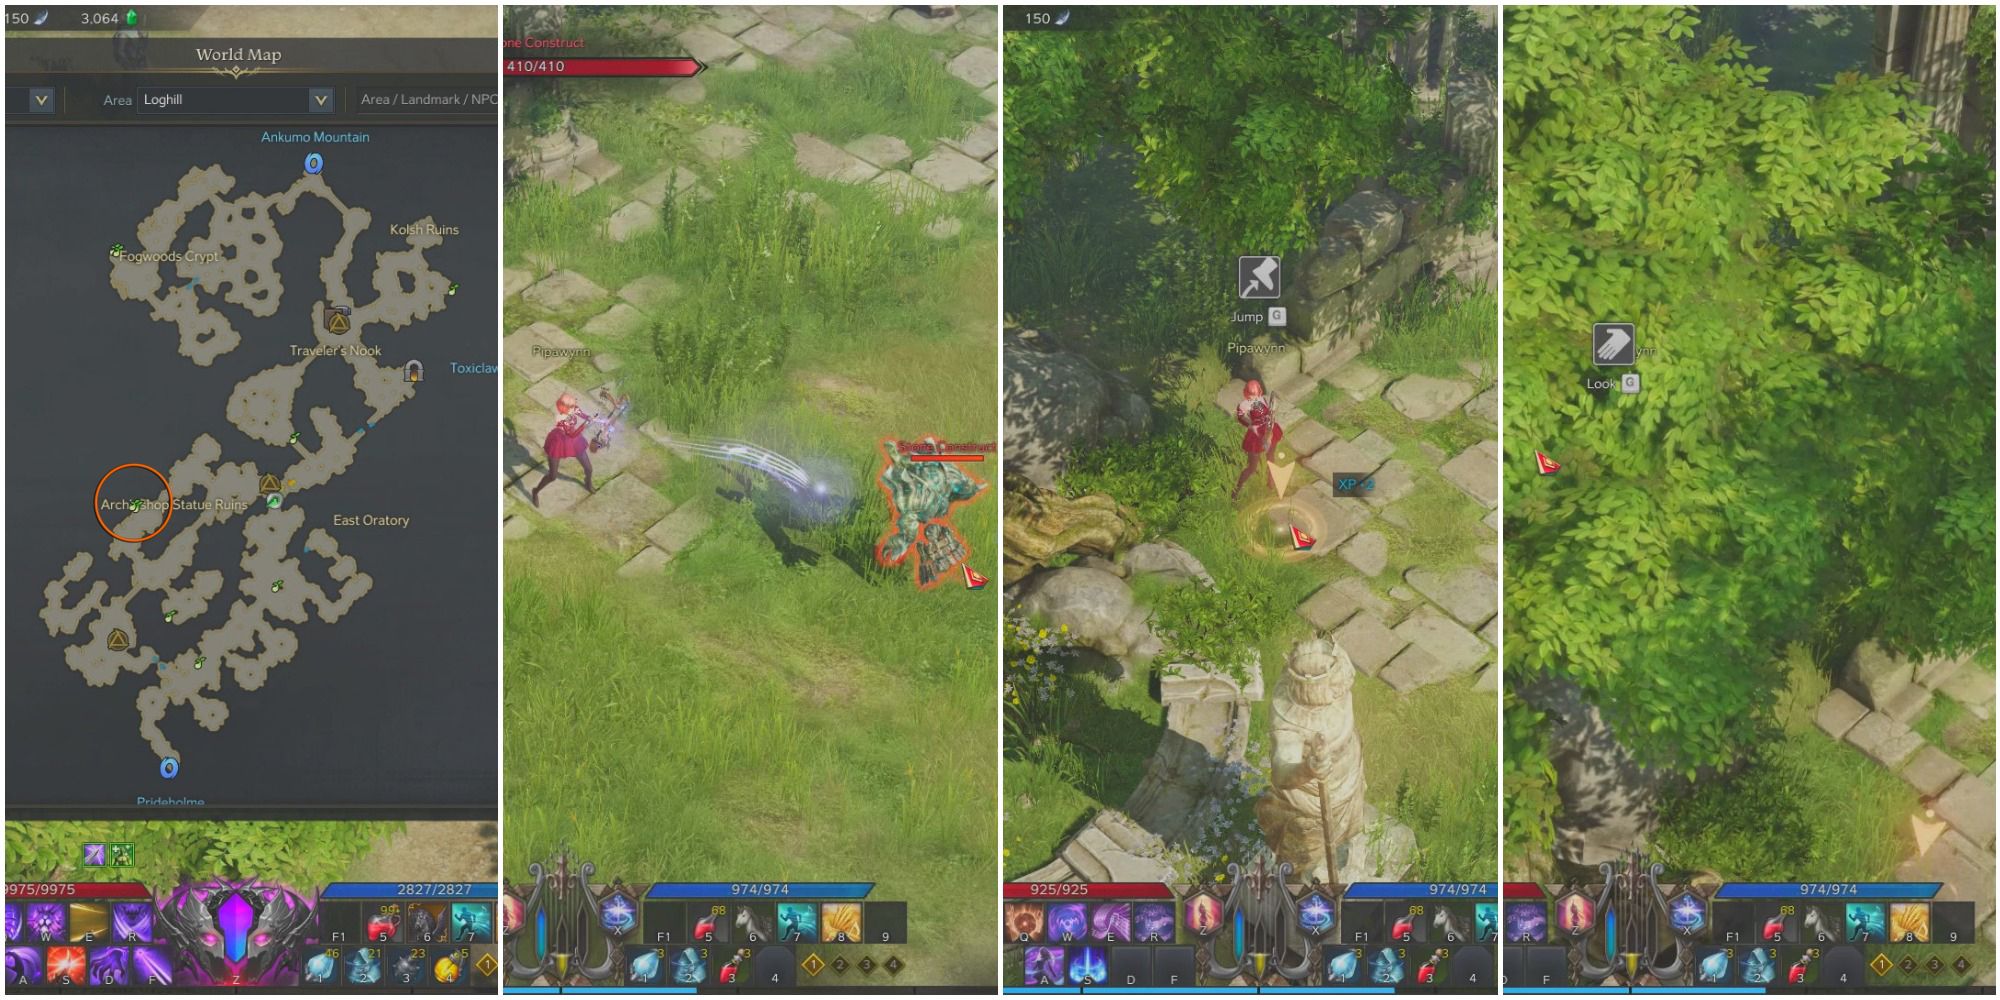 A split image of a map of Loghill, a bard attacking a Stone Construct, a bard standing on a Jump spot and a bard hidden behind tree foliage with a Look icon